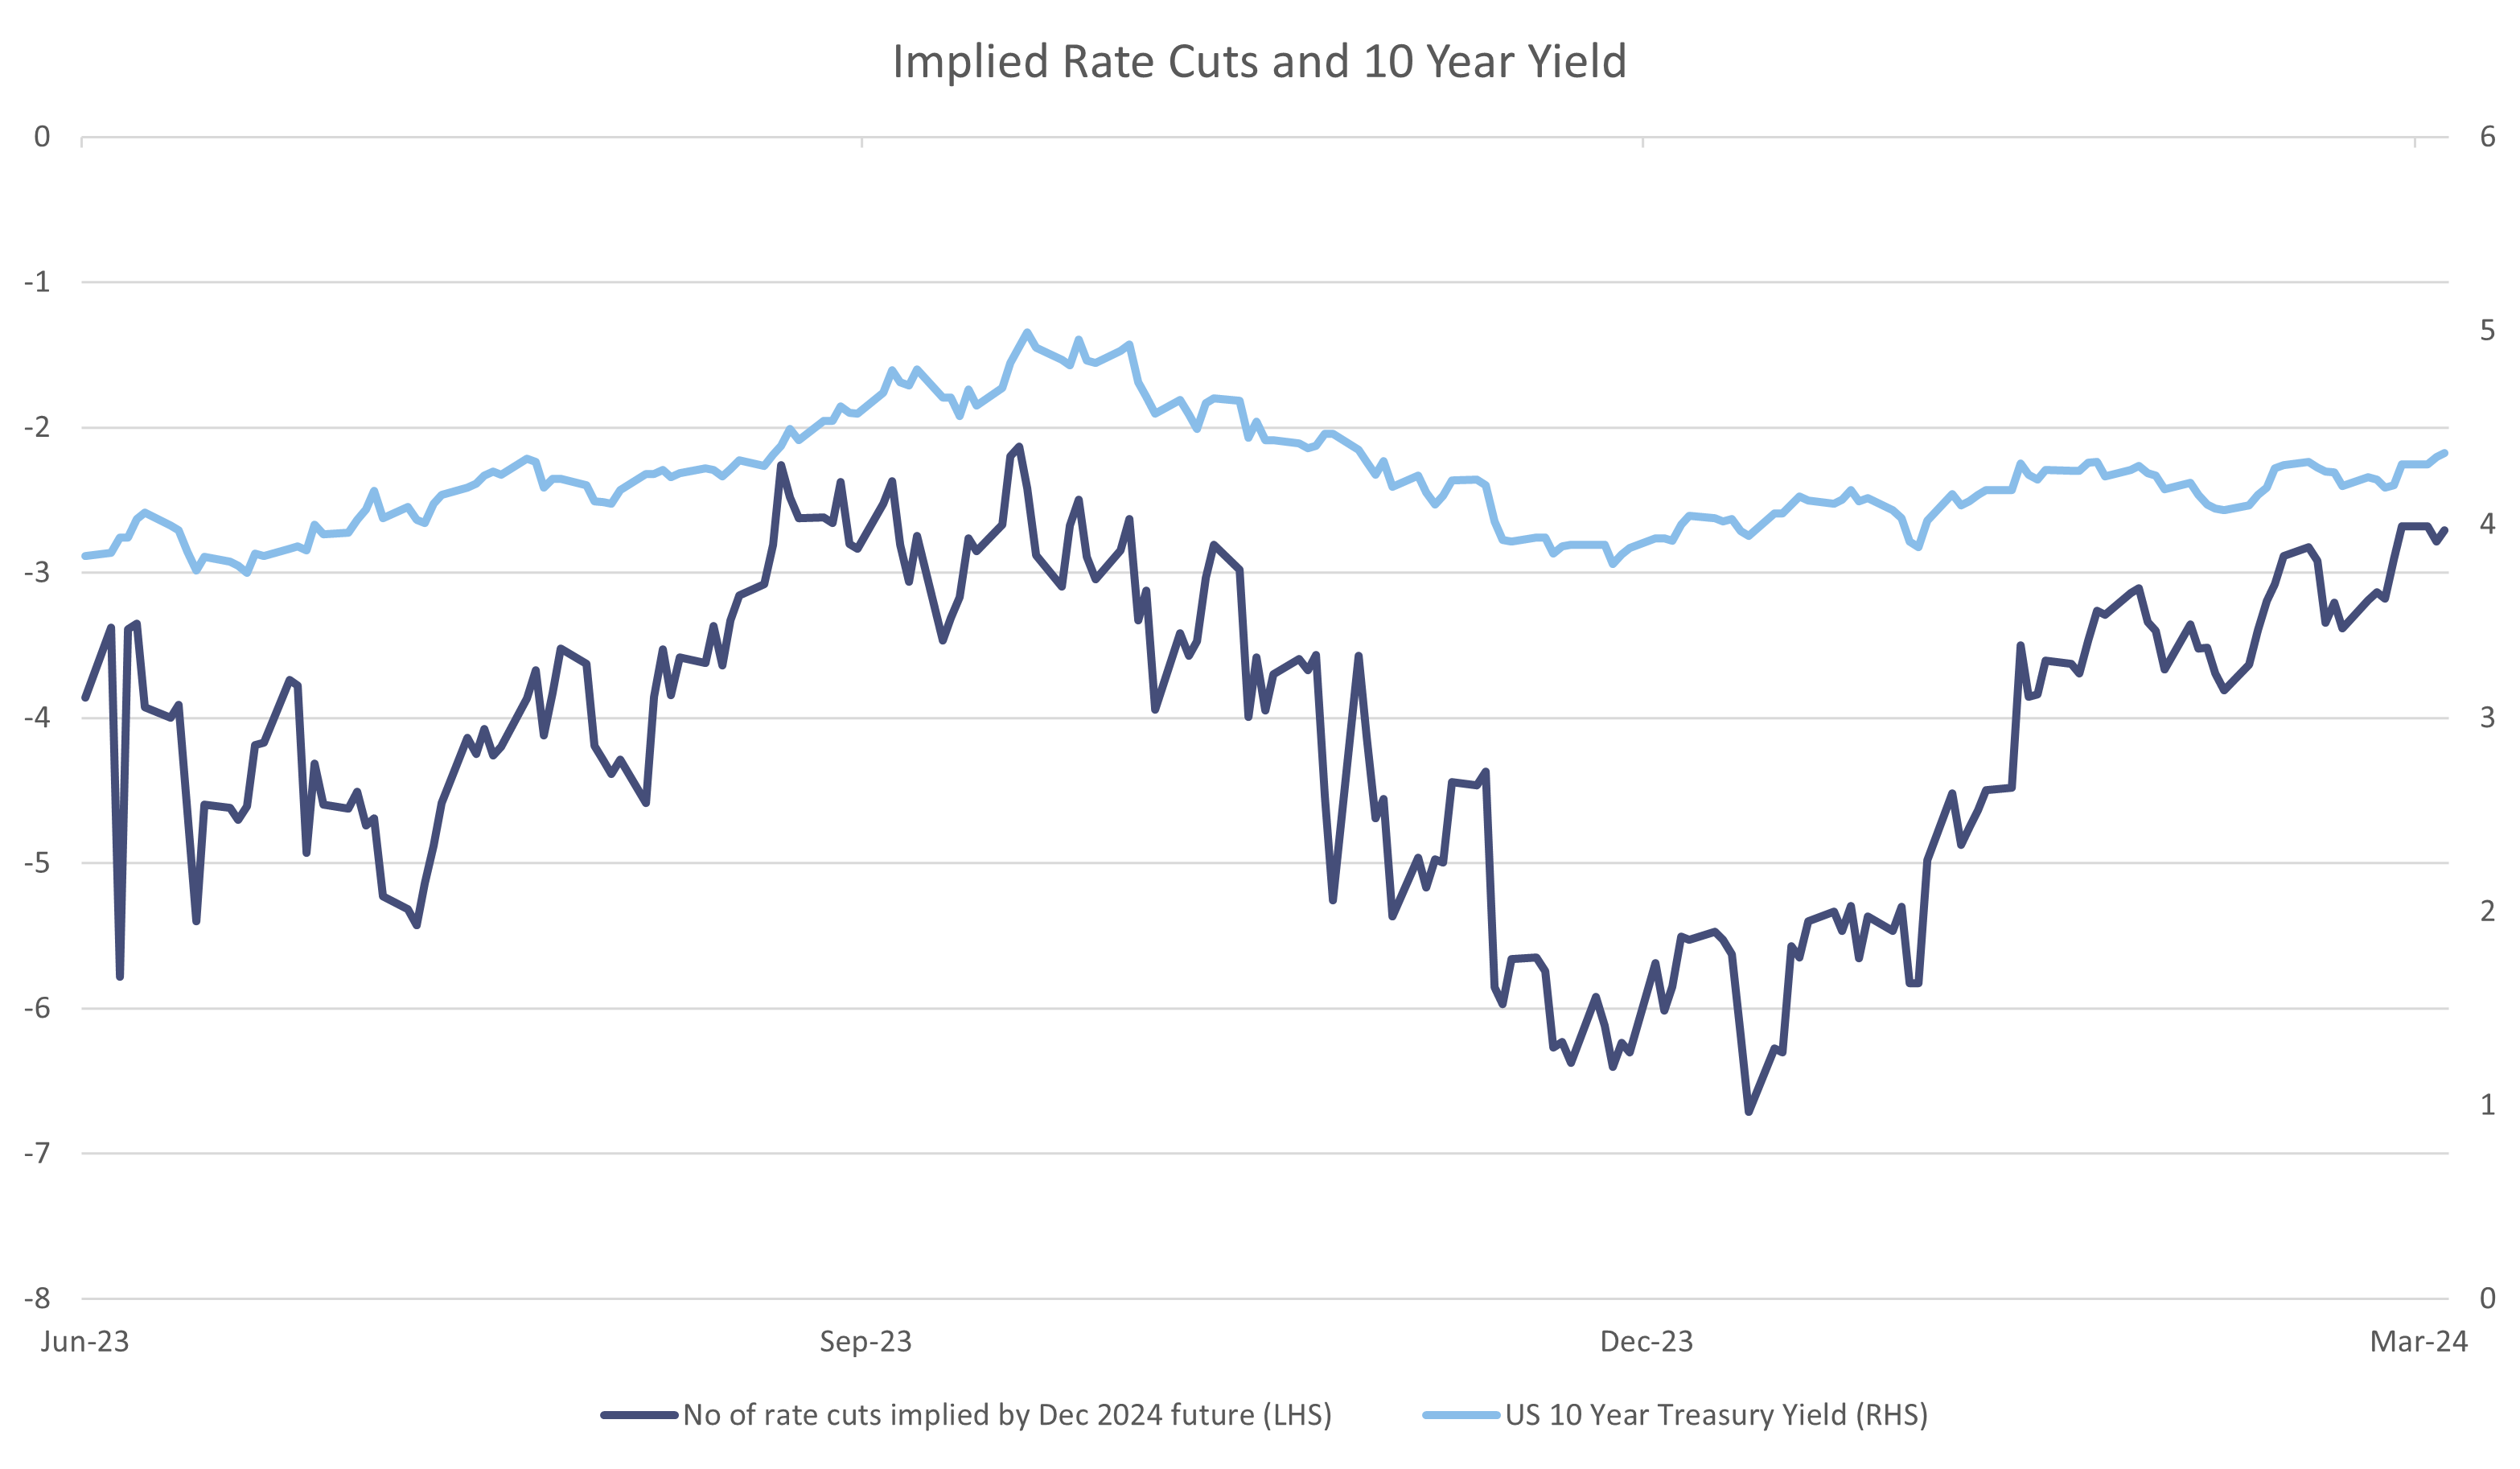 Implied rate cuts and 10 year yield chart